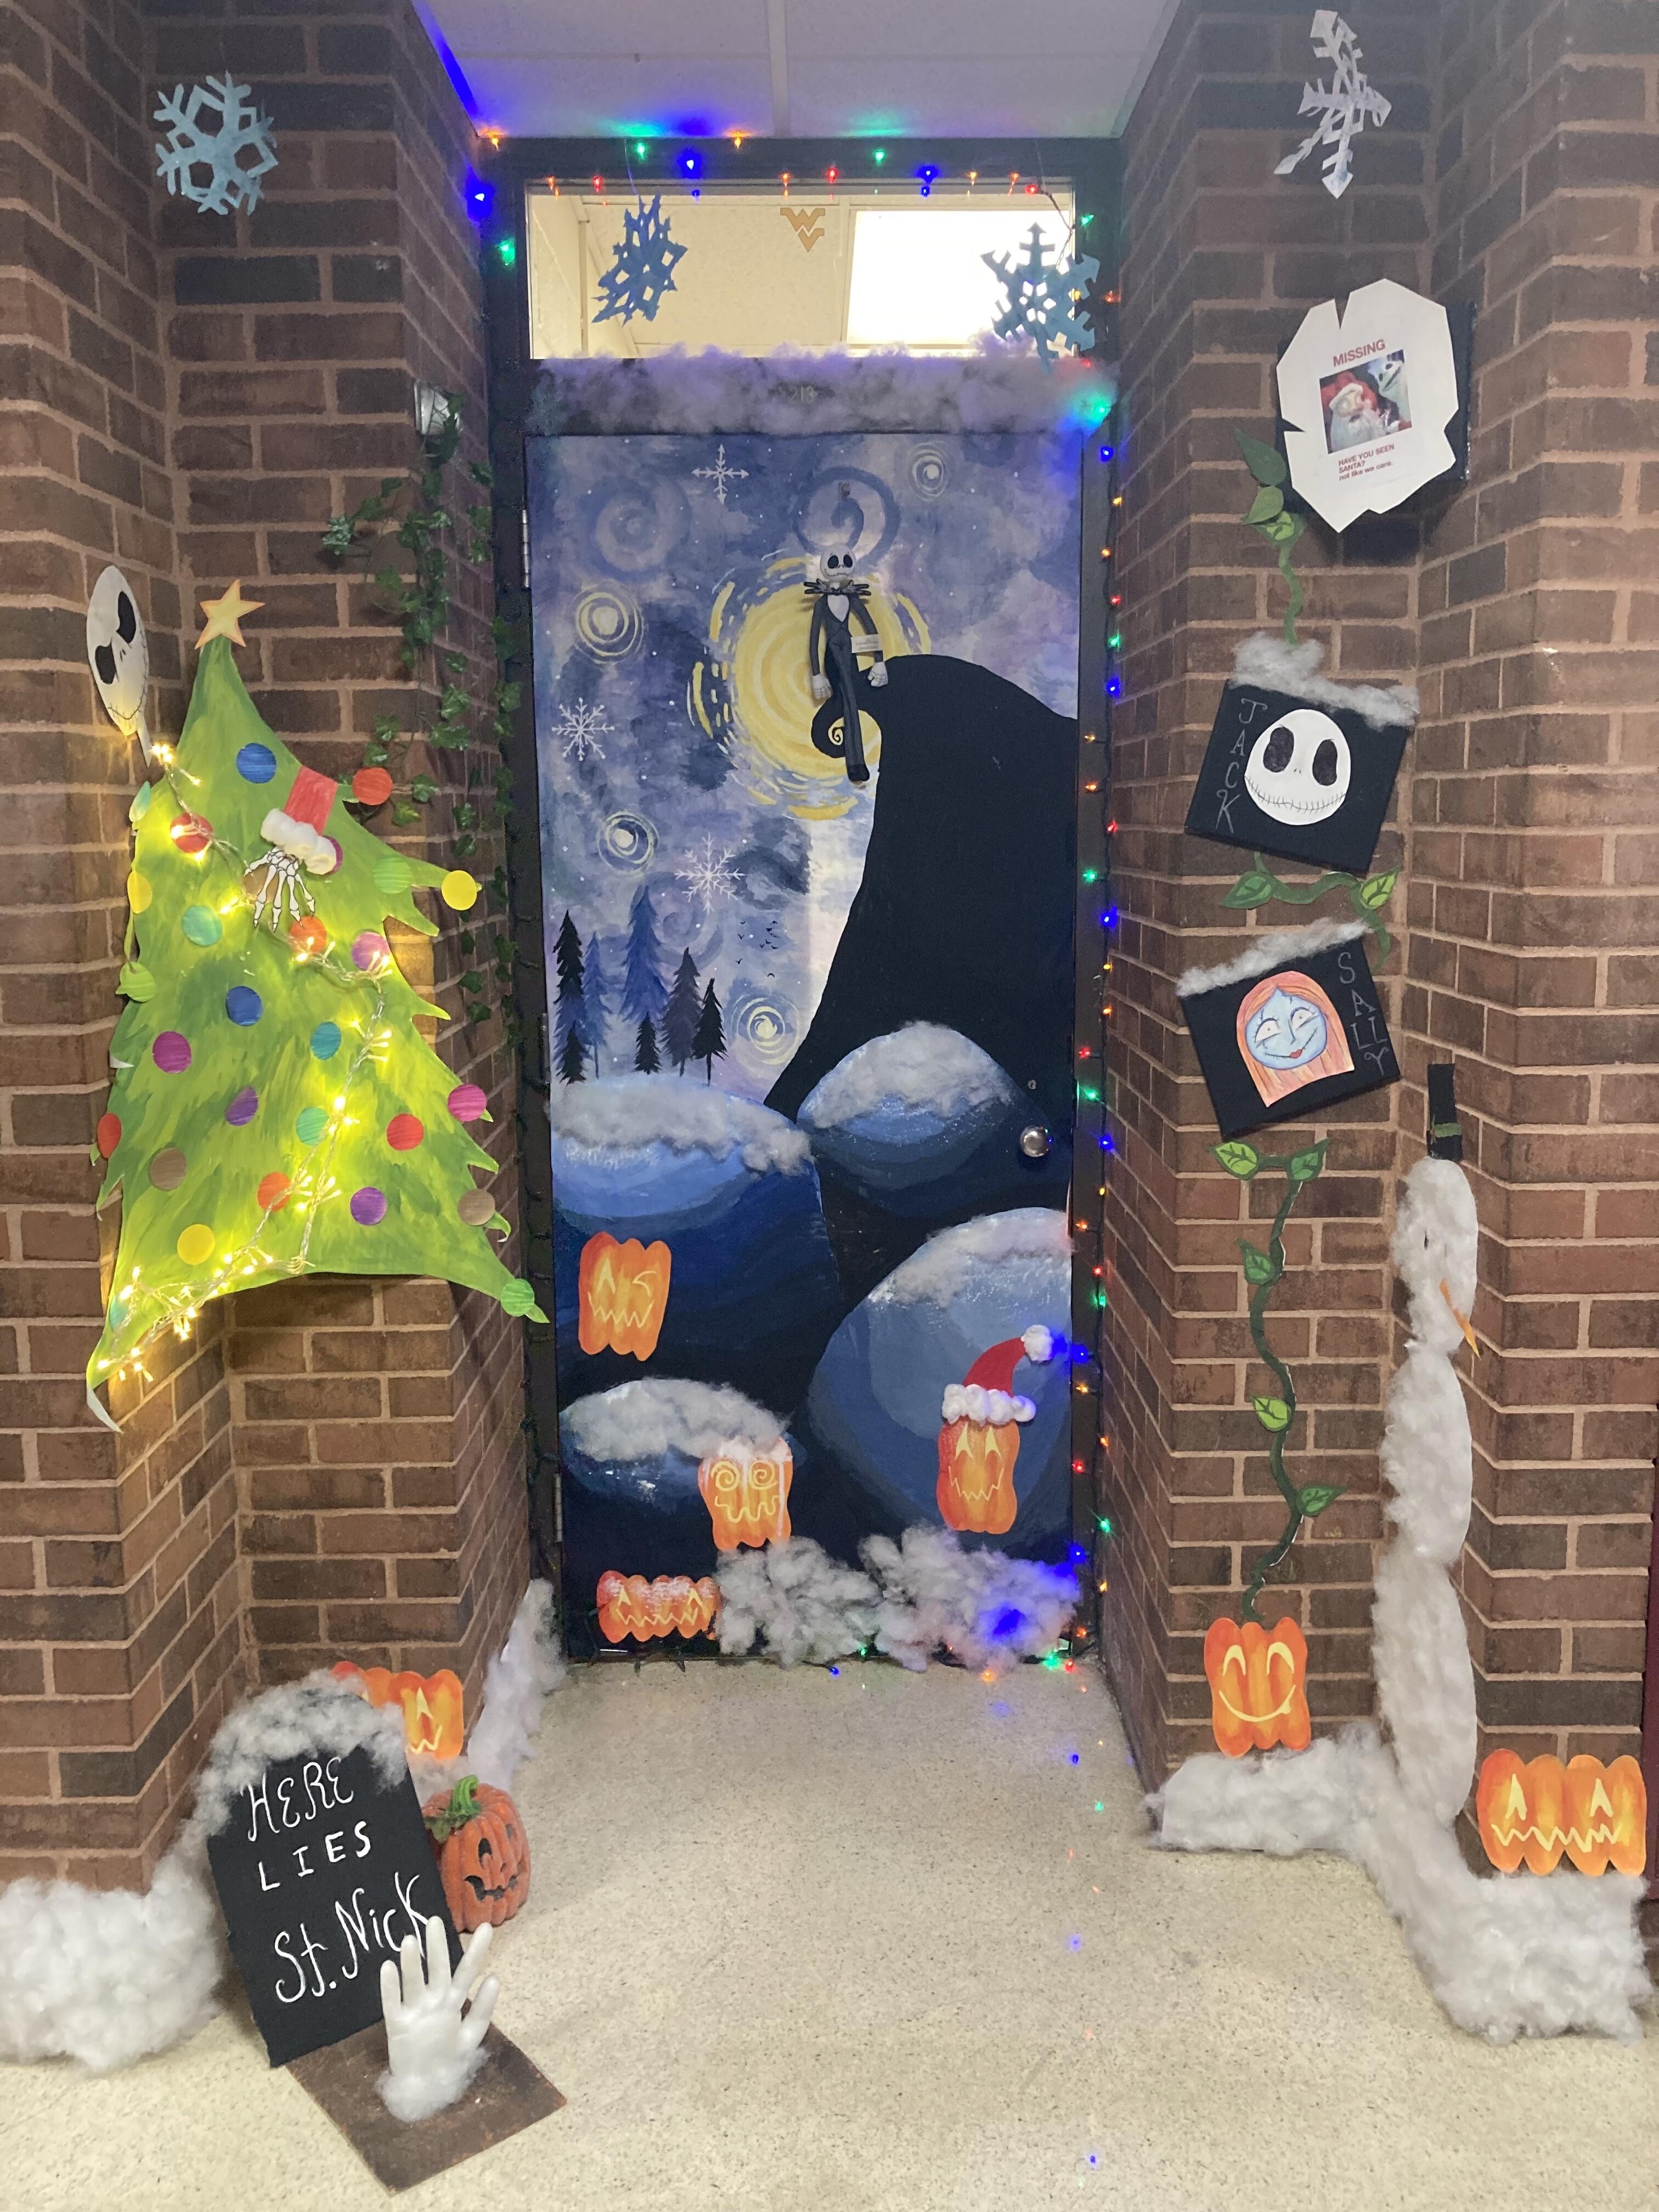 A classroom door is decorated to celebrate the holidays. The decorations have a Nightmare Before Christmas theme to them.